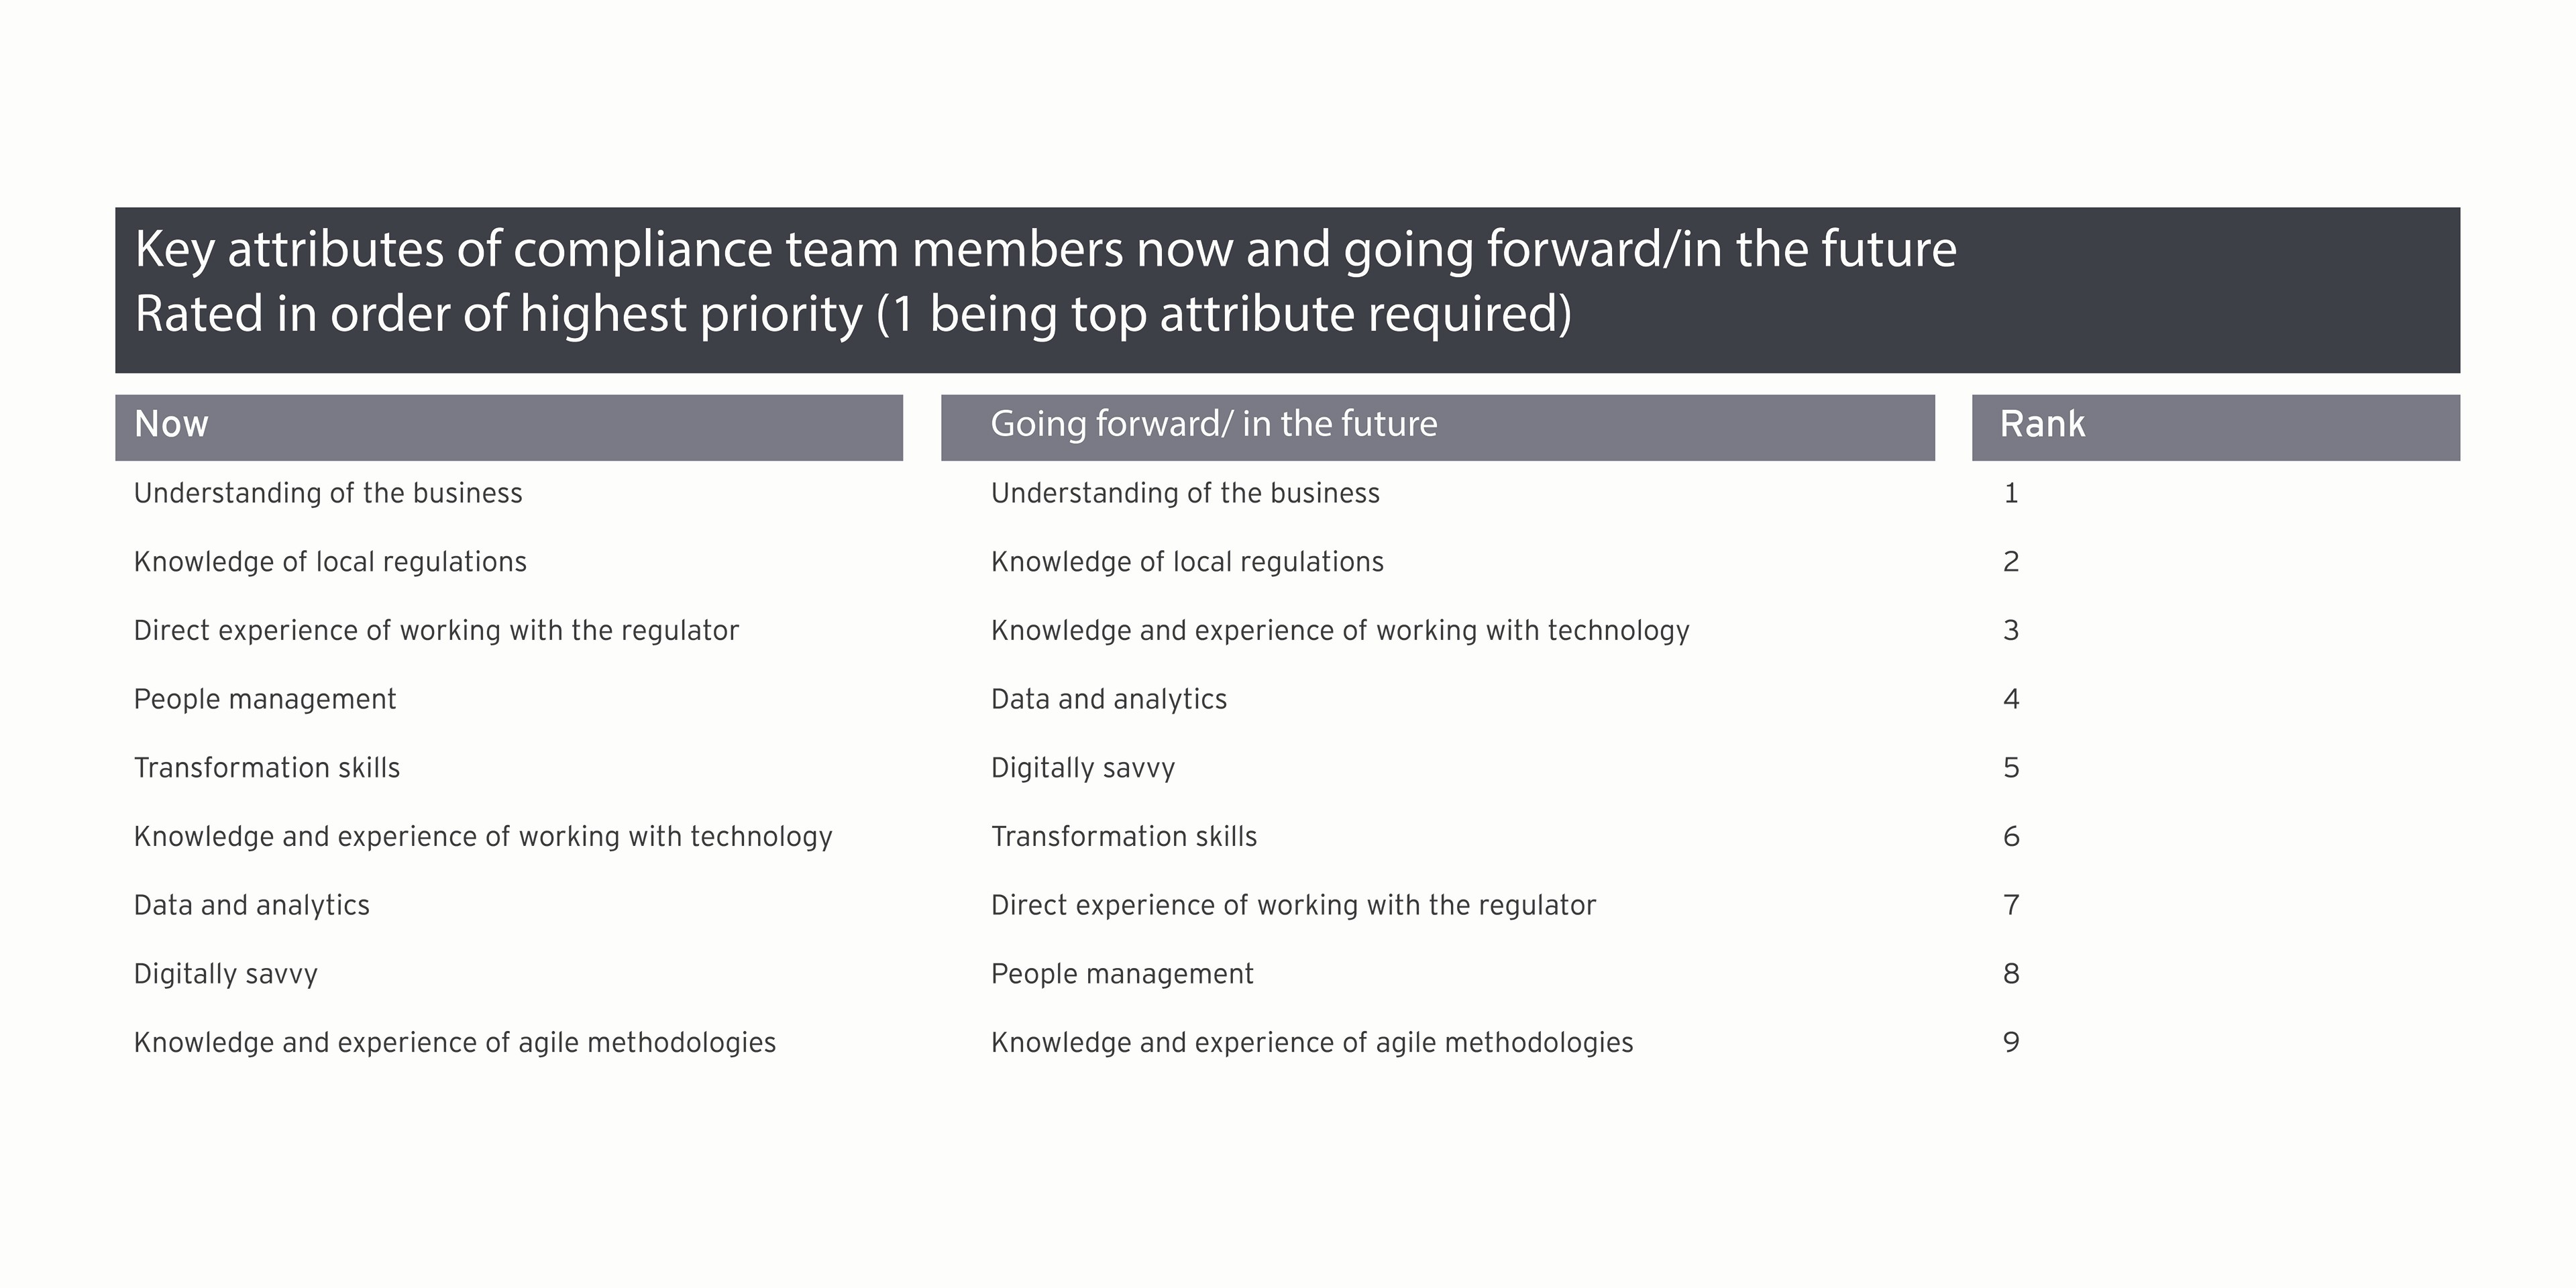 Ket attributes of compliance team members now and going forward/in the future